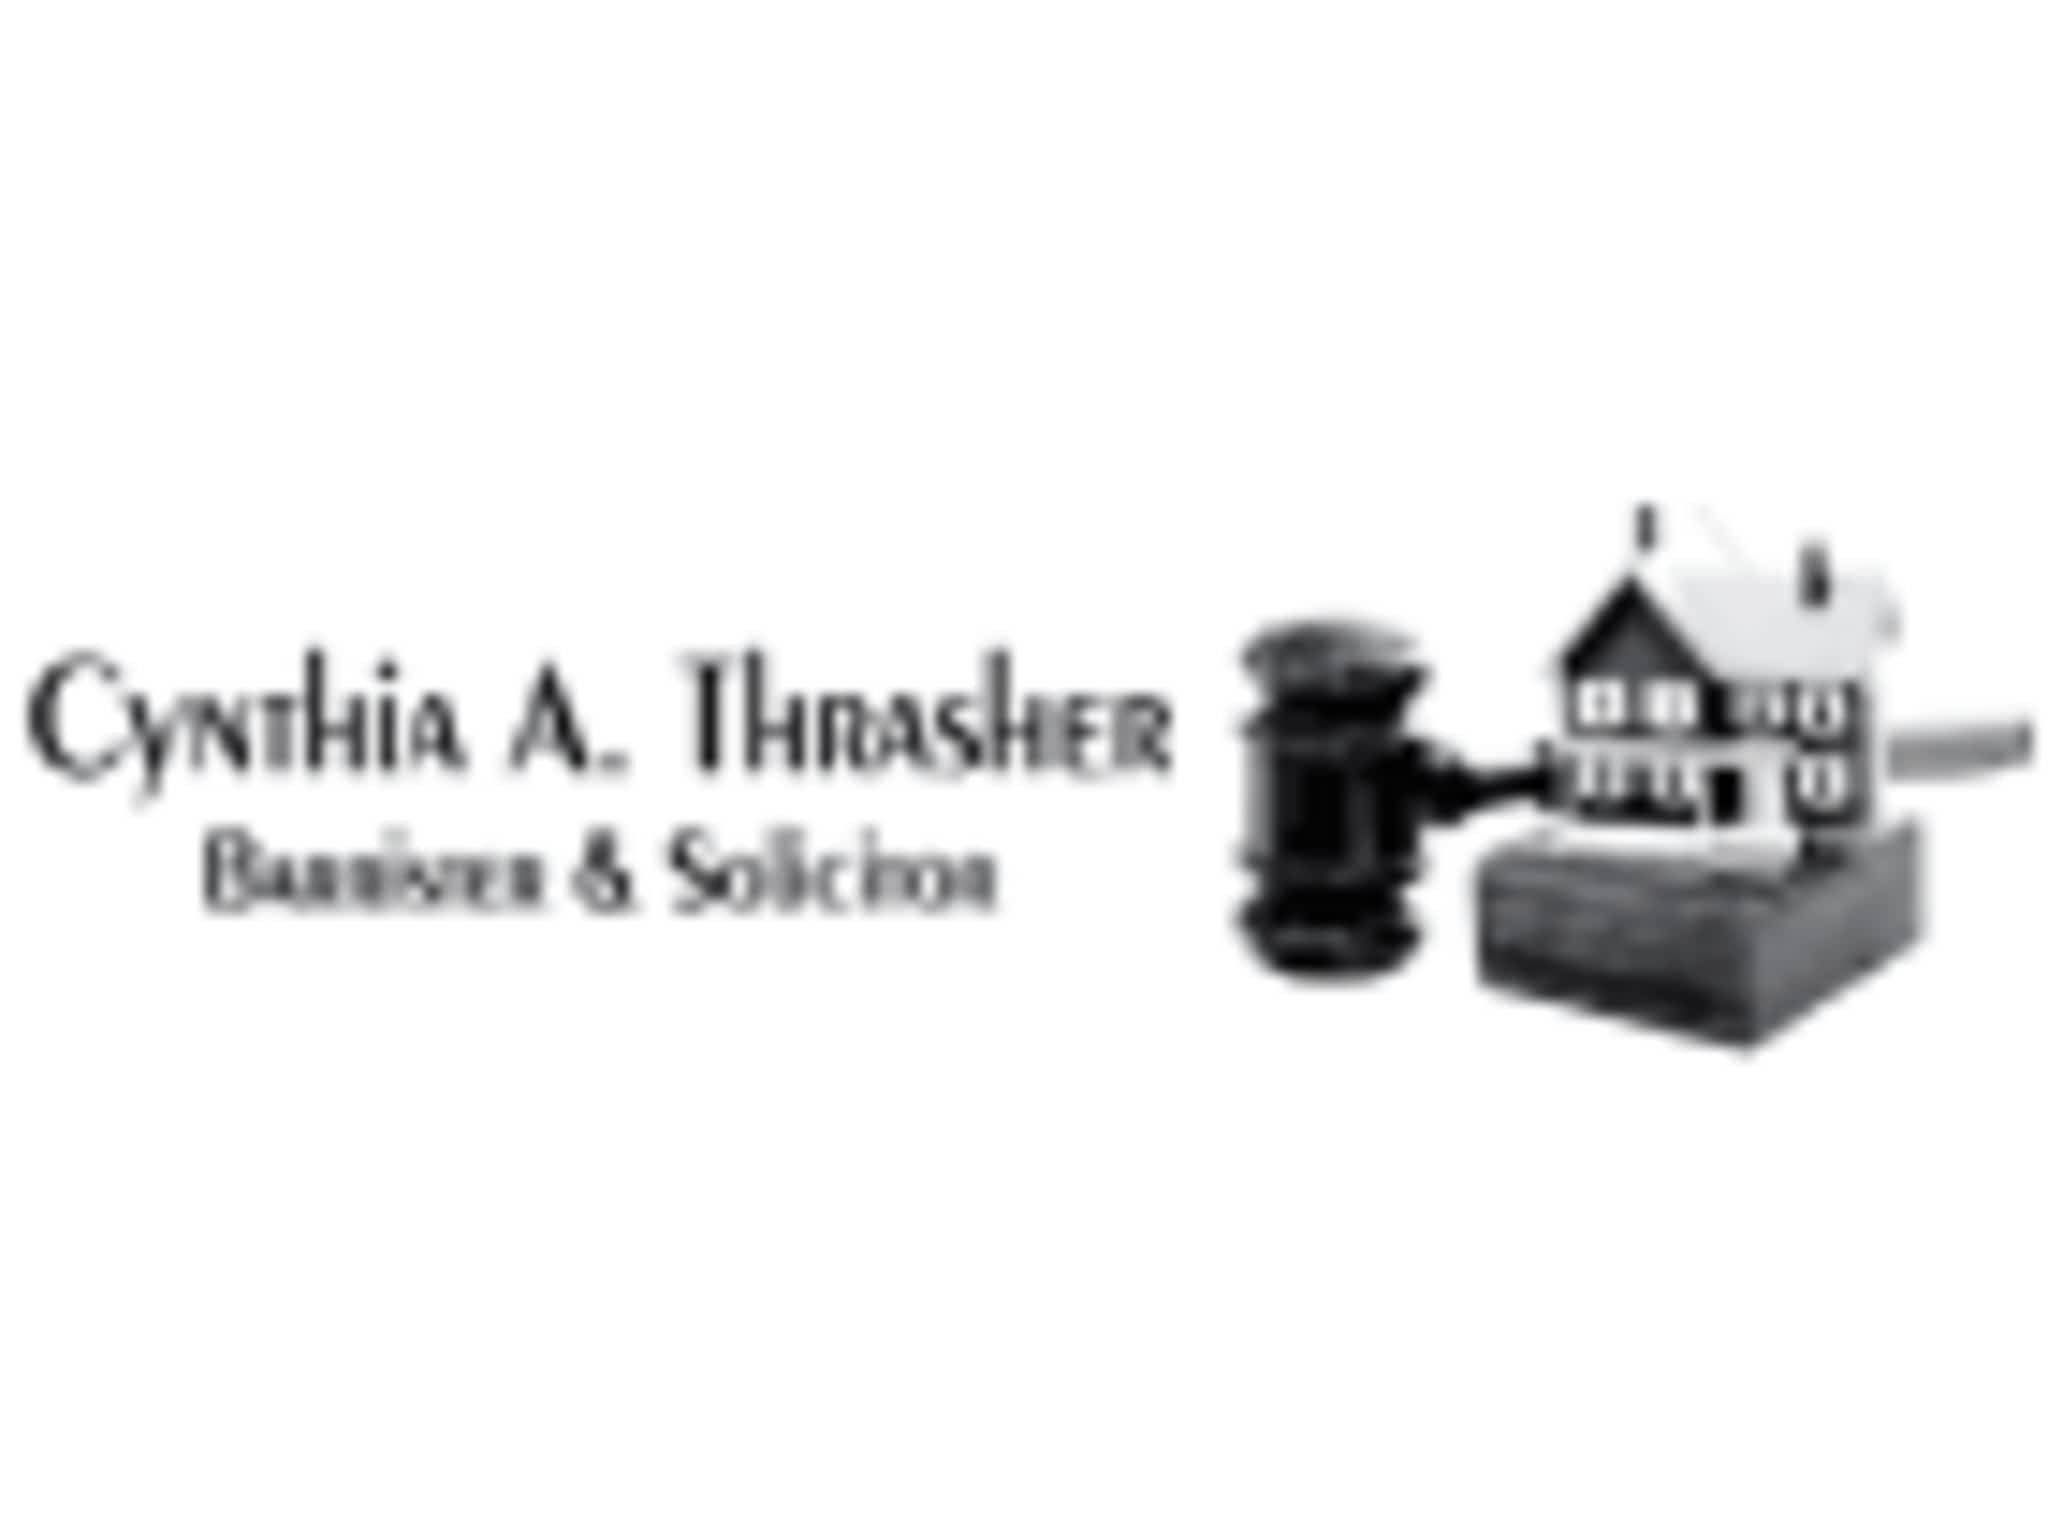 photo Cynthia Thrasher Barrister & Solicitor